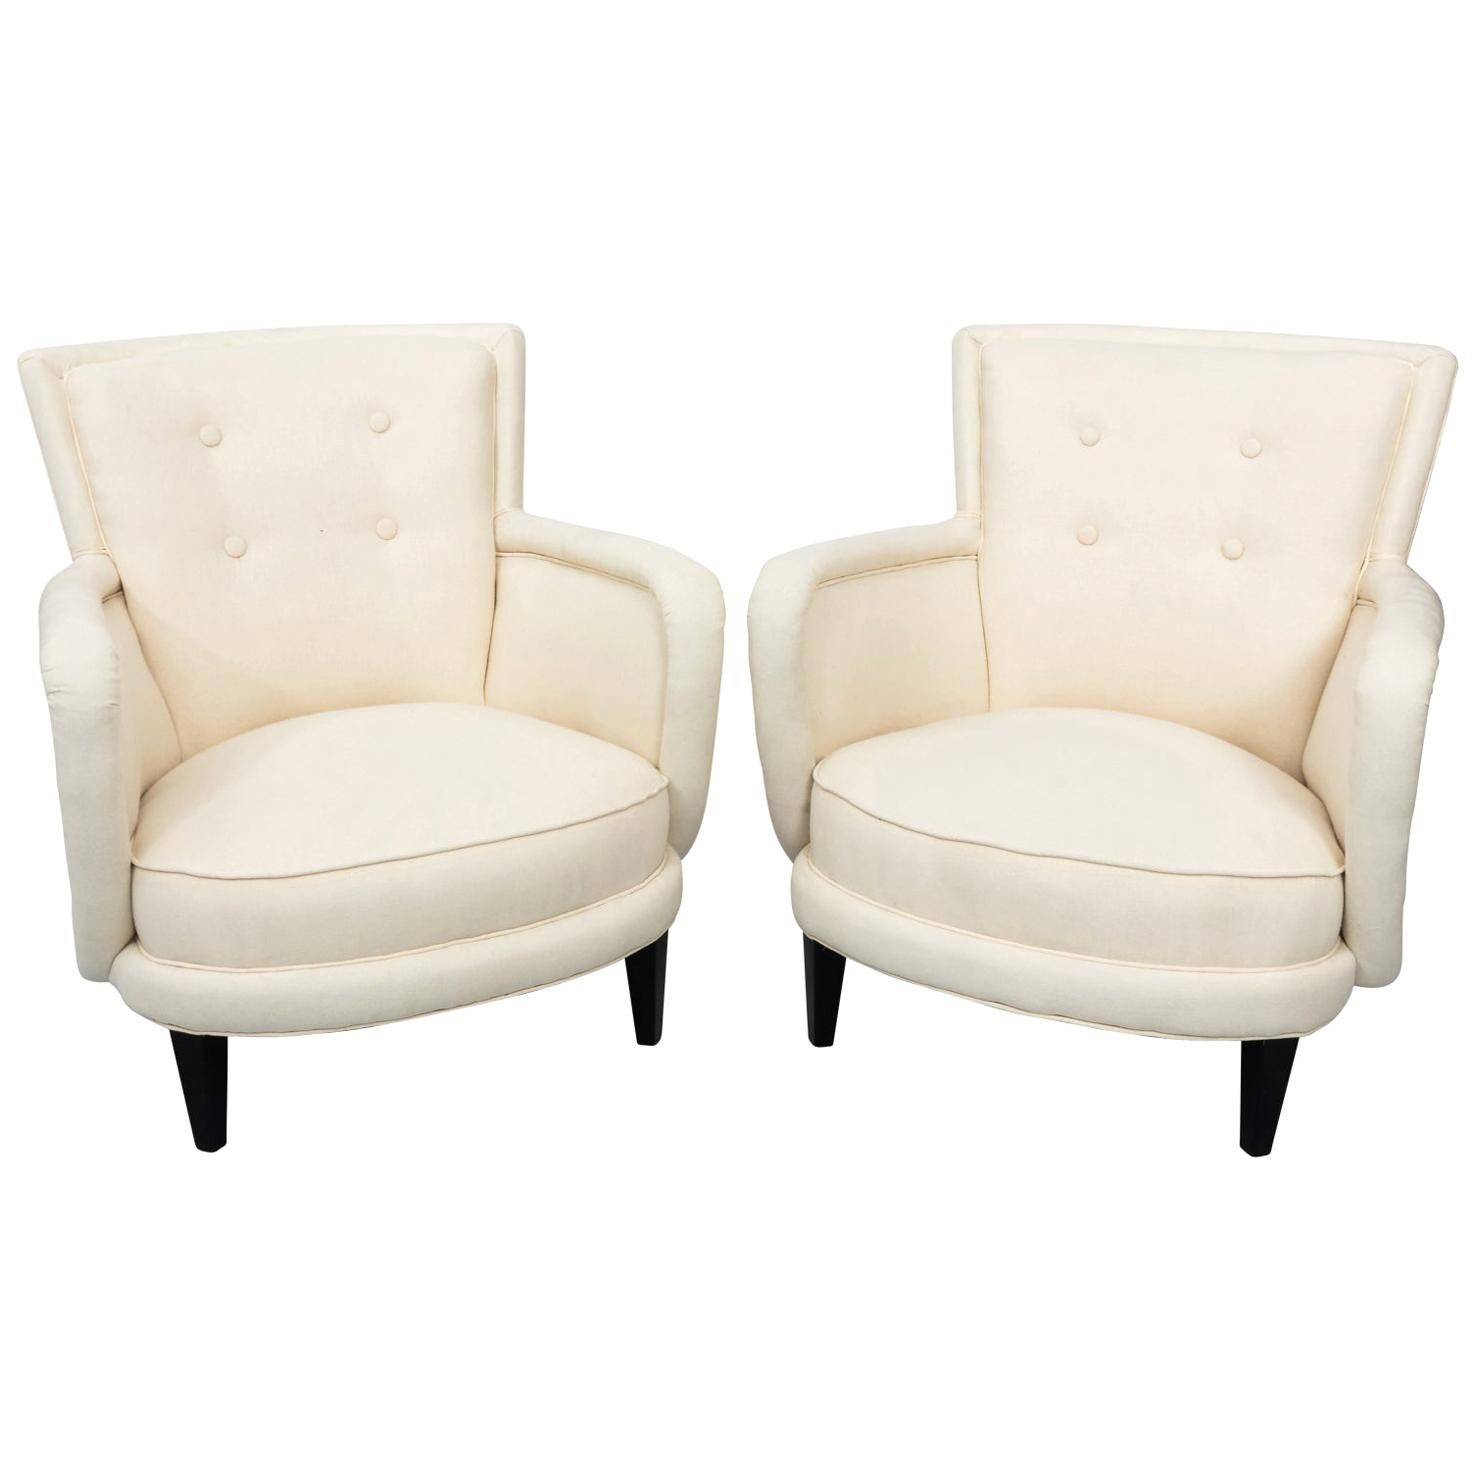 Tufted Mid-Century Modern Club Chairs